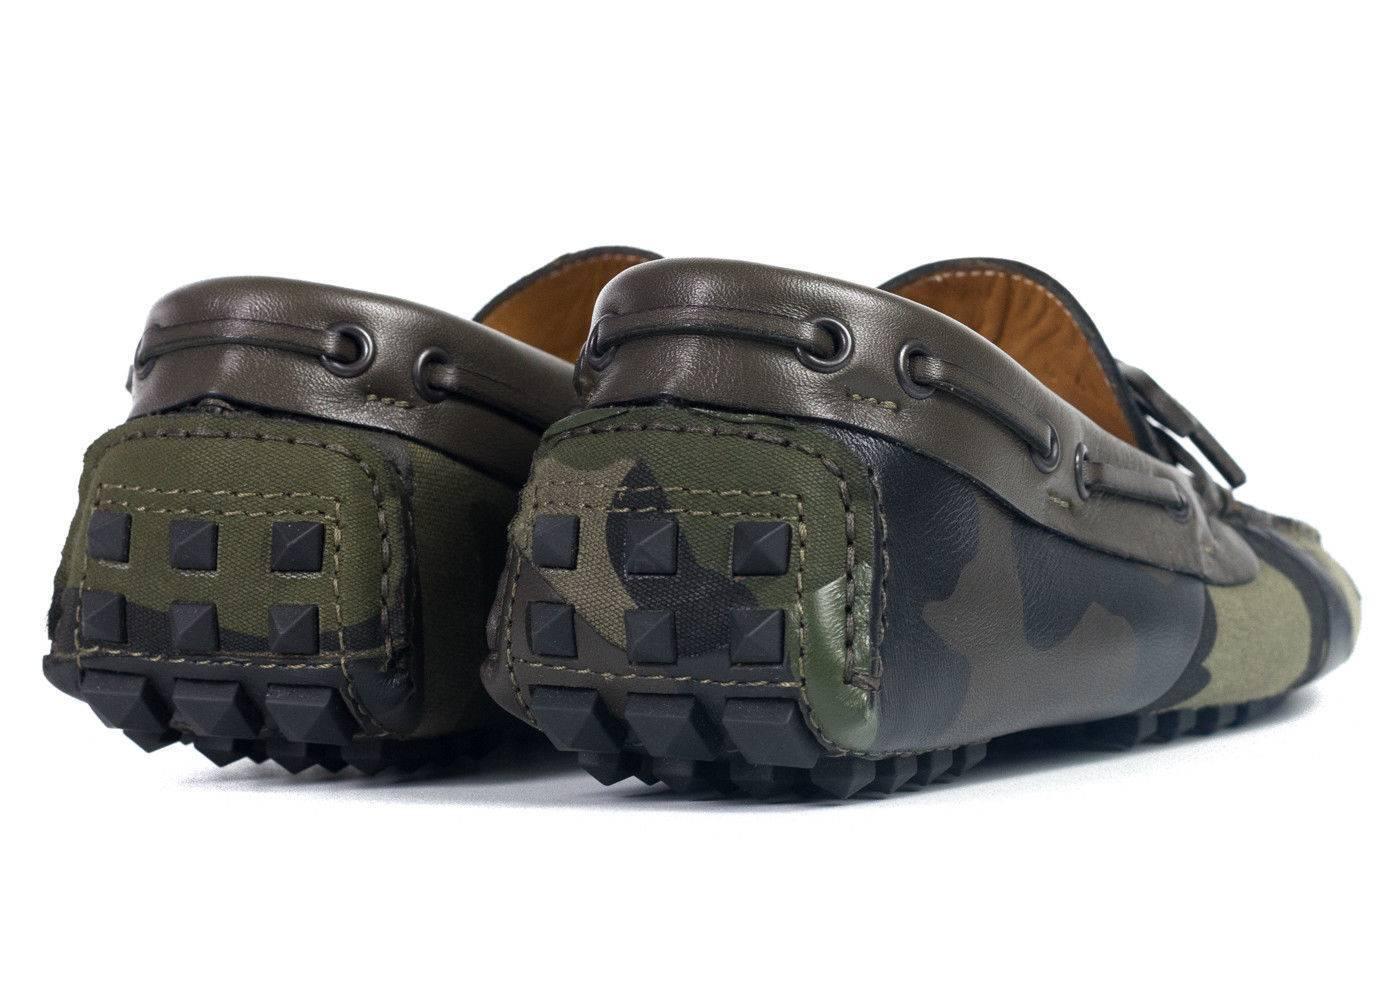 Slip into the Valentino Camouflage Print Drivers and step out in style. The mix of 